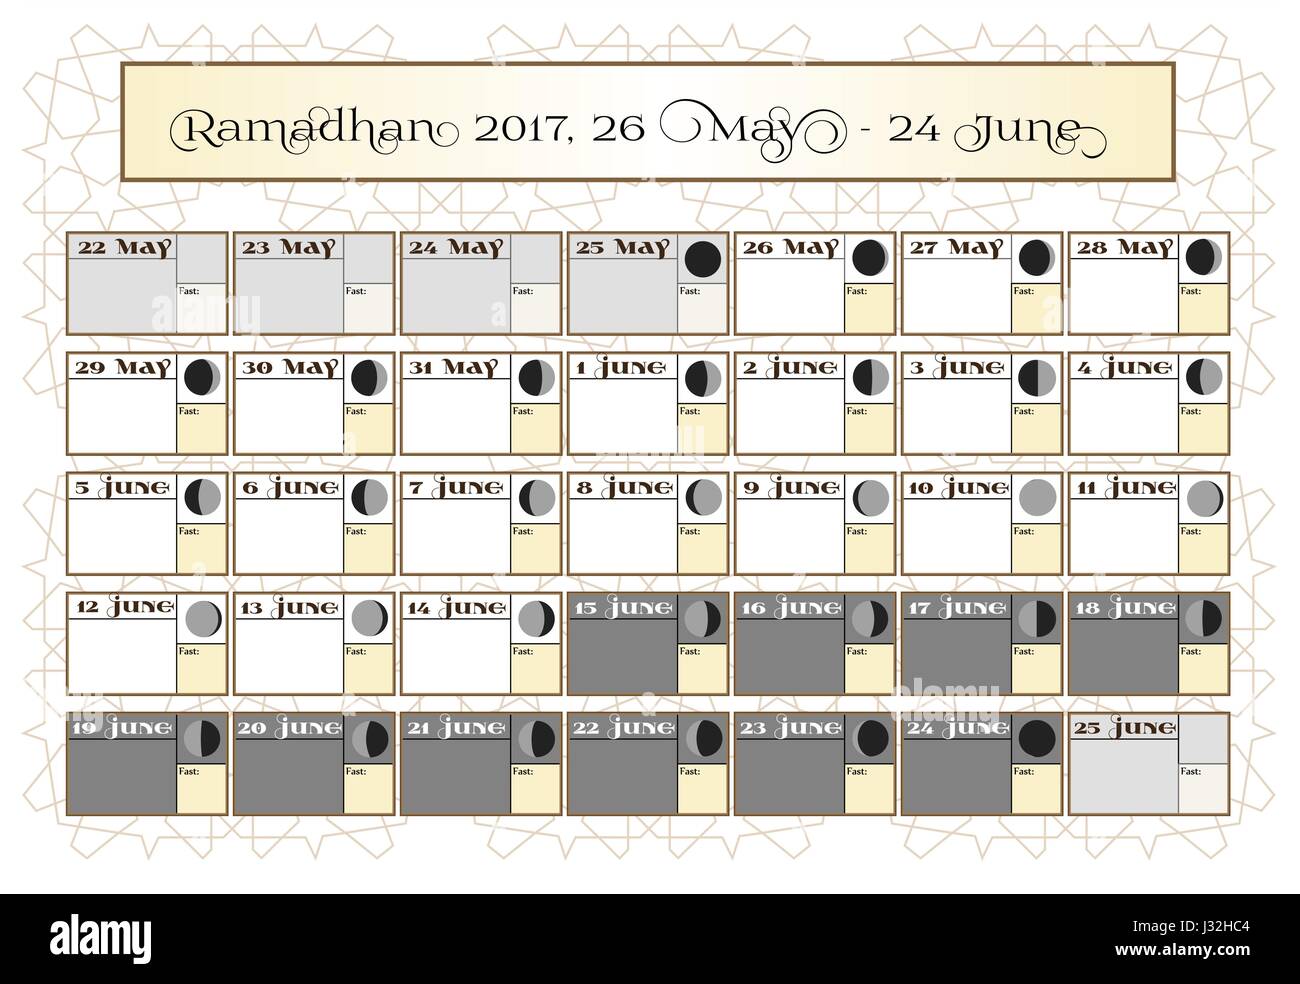 Ramadan calendar 2017, 26th May. Check date choice. Includes: fasting tick calendar, moon cycle - phases, 30 days of Ramadan on white background with Islamic pattern. Vector illustration. Stock Vector